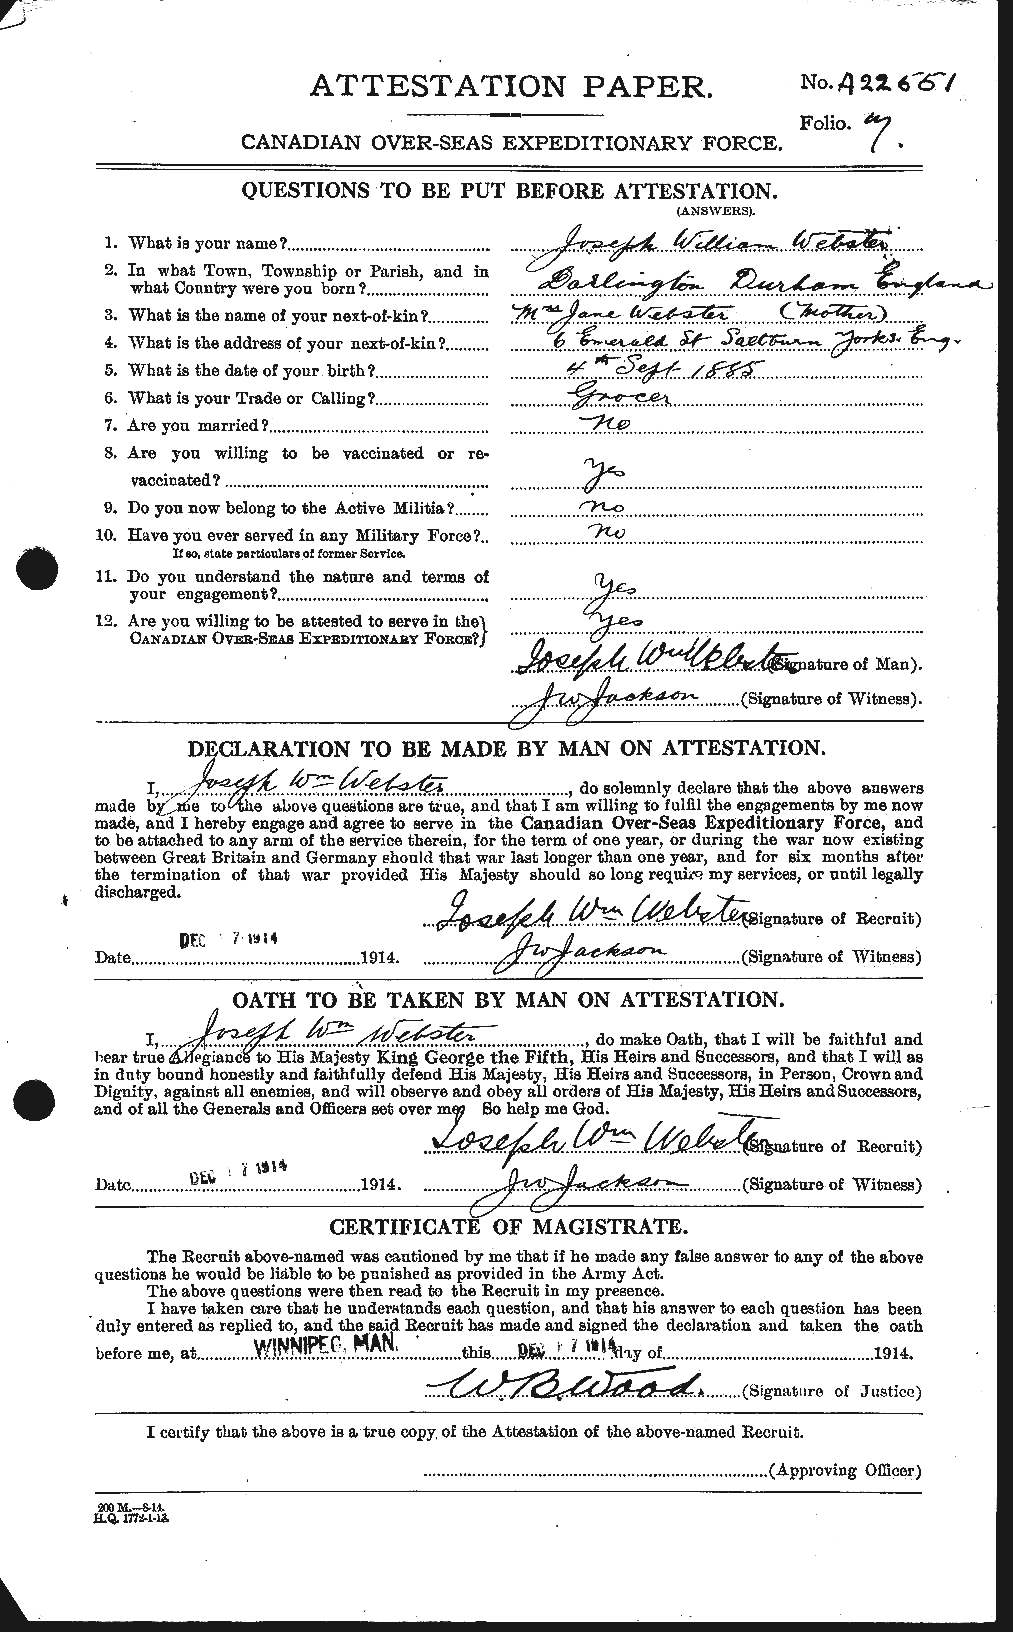 Personnel Records of the First World War - CEF 670508a